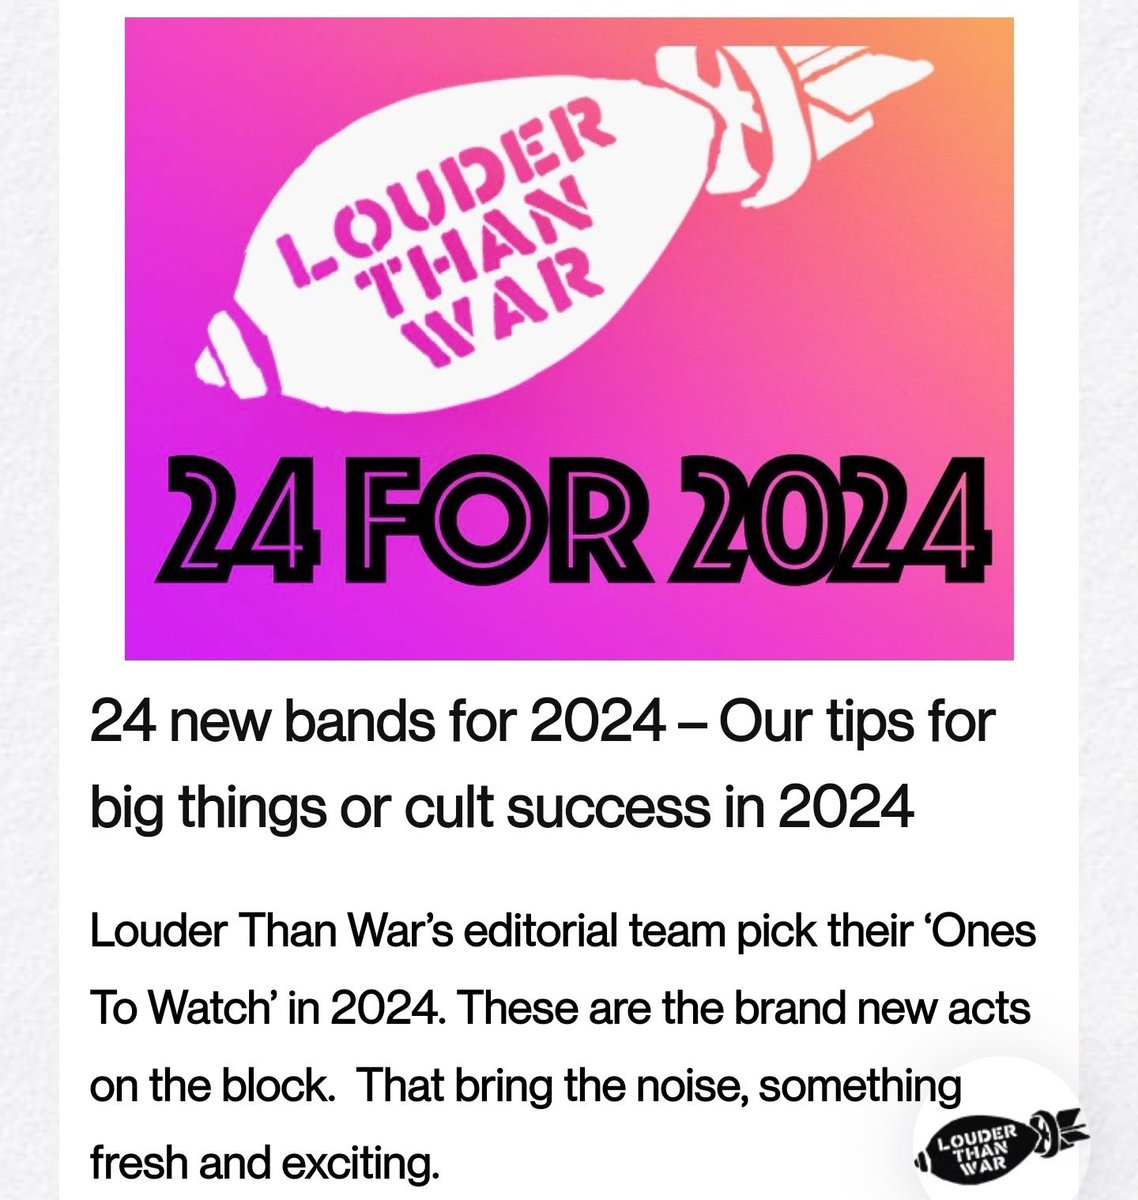 GET IN! This game-changing year just gets better. Honoured to make The 24 New Bands for ’24 @louderthanwar tips for 2024 w/special mentions for @berenyi_miki @theboo_radleys & @officialSpzd louderthanwar.com/24-new-bands-f… We headline @twopalmshackney Jan 27 w/@safariinnband & @YUKE_band